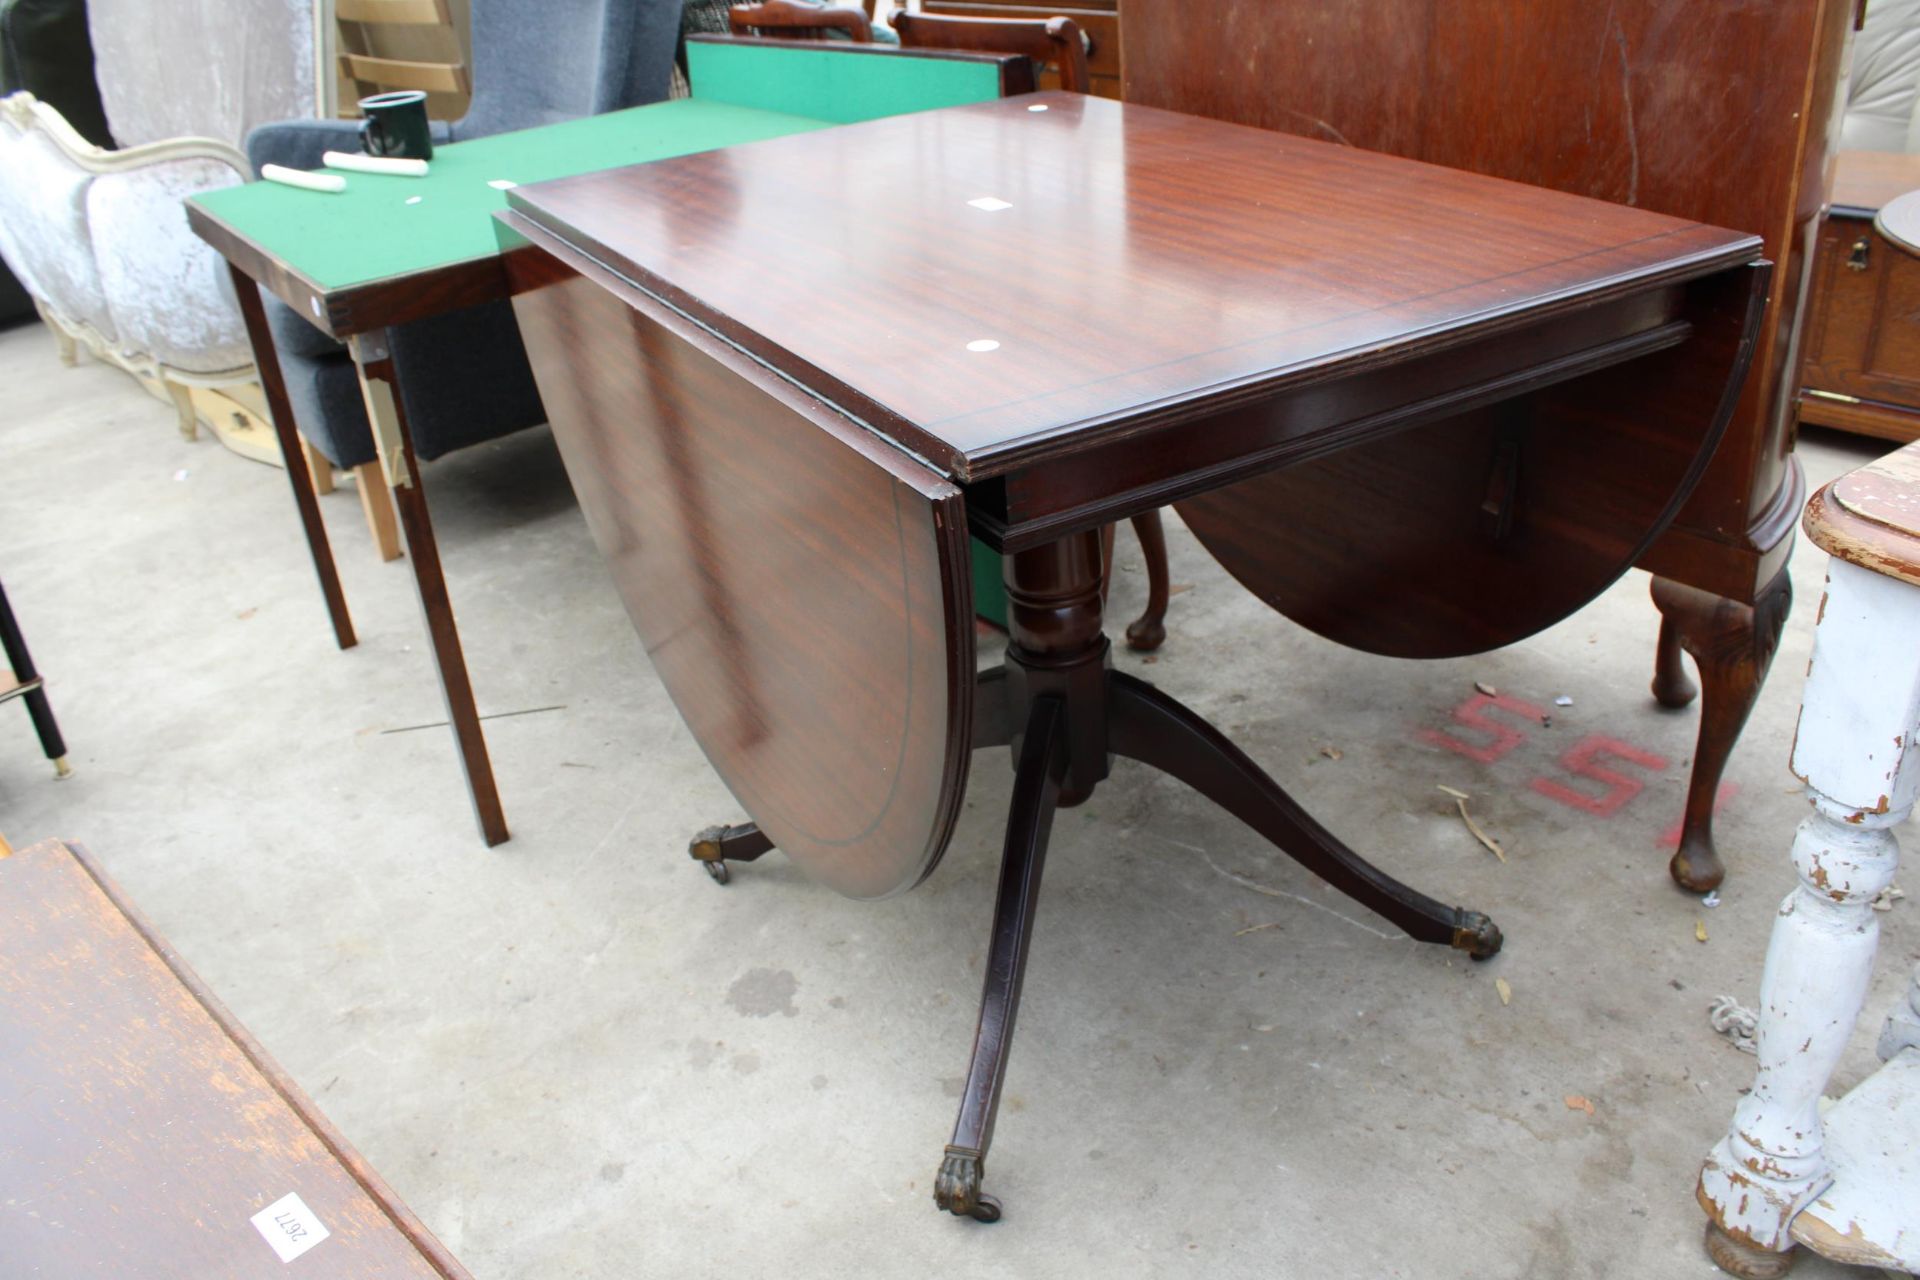 A REGENCY STYLE MAHOGANY DROP-LEAF PEDESTAL DINING TABLE, 61" X 36" OPENED - Image 2 of 3